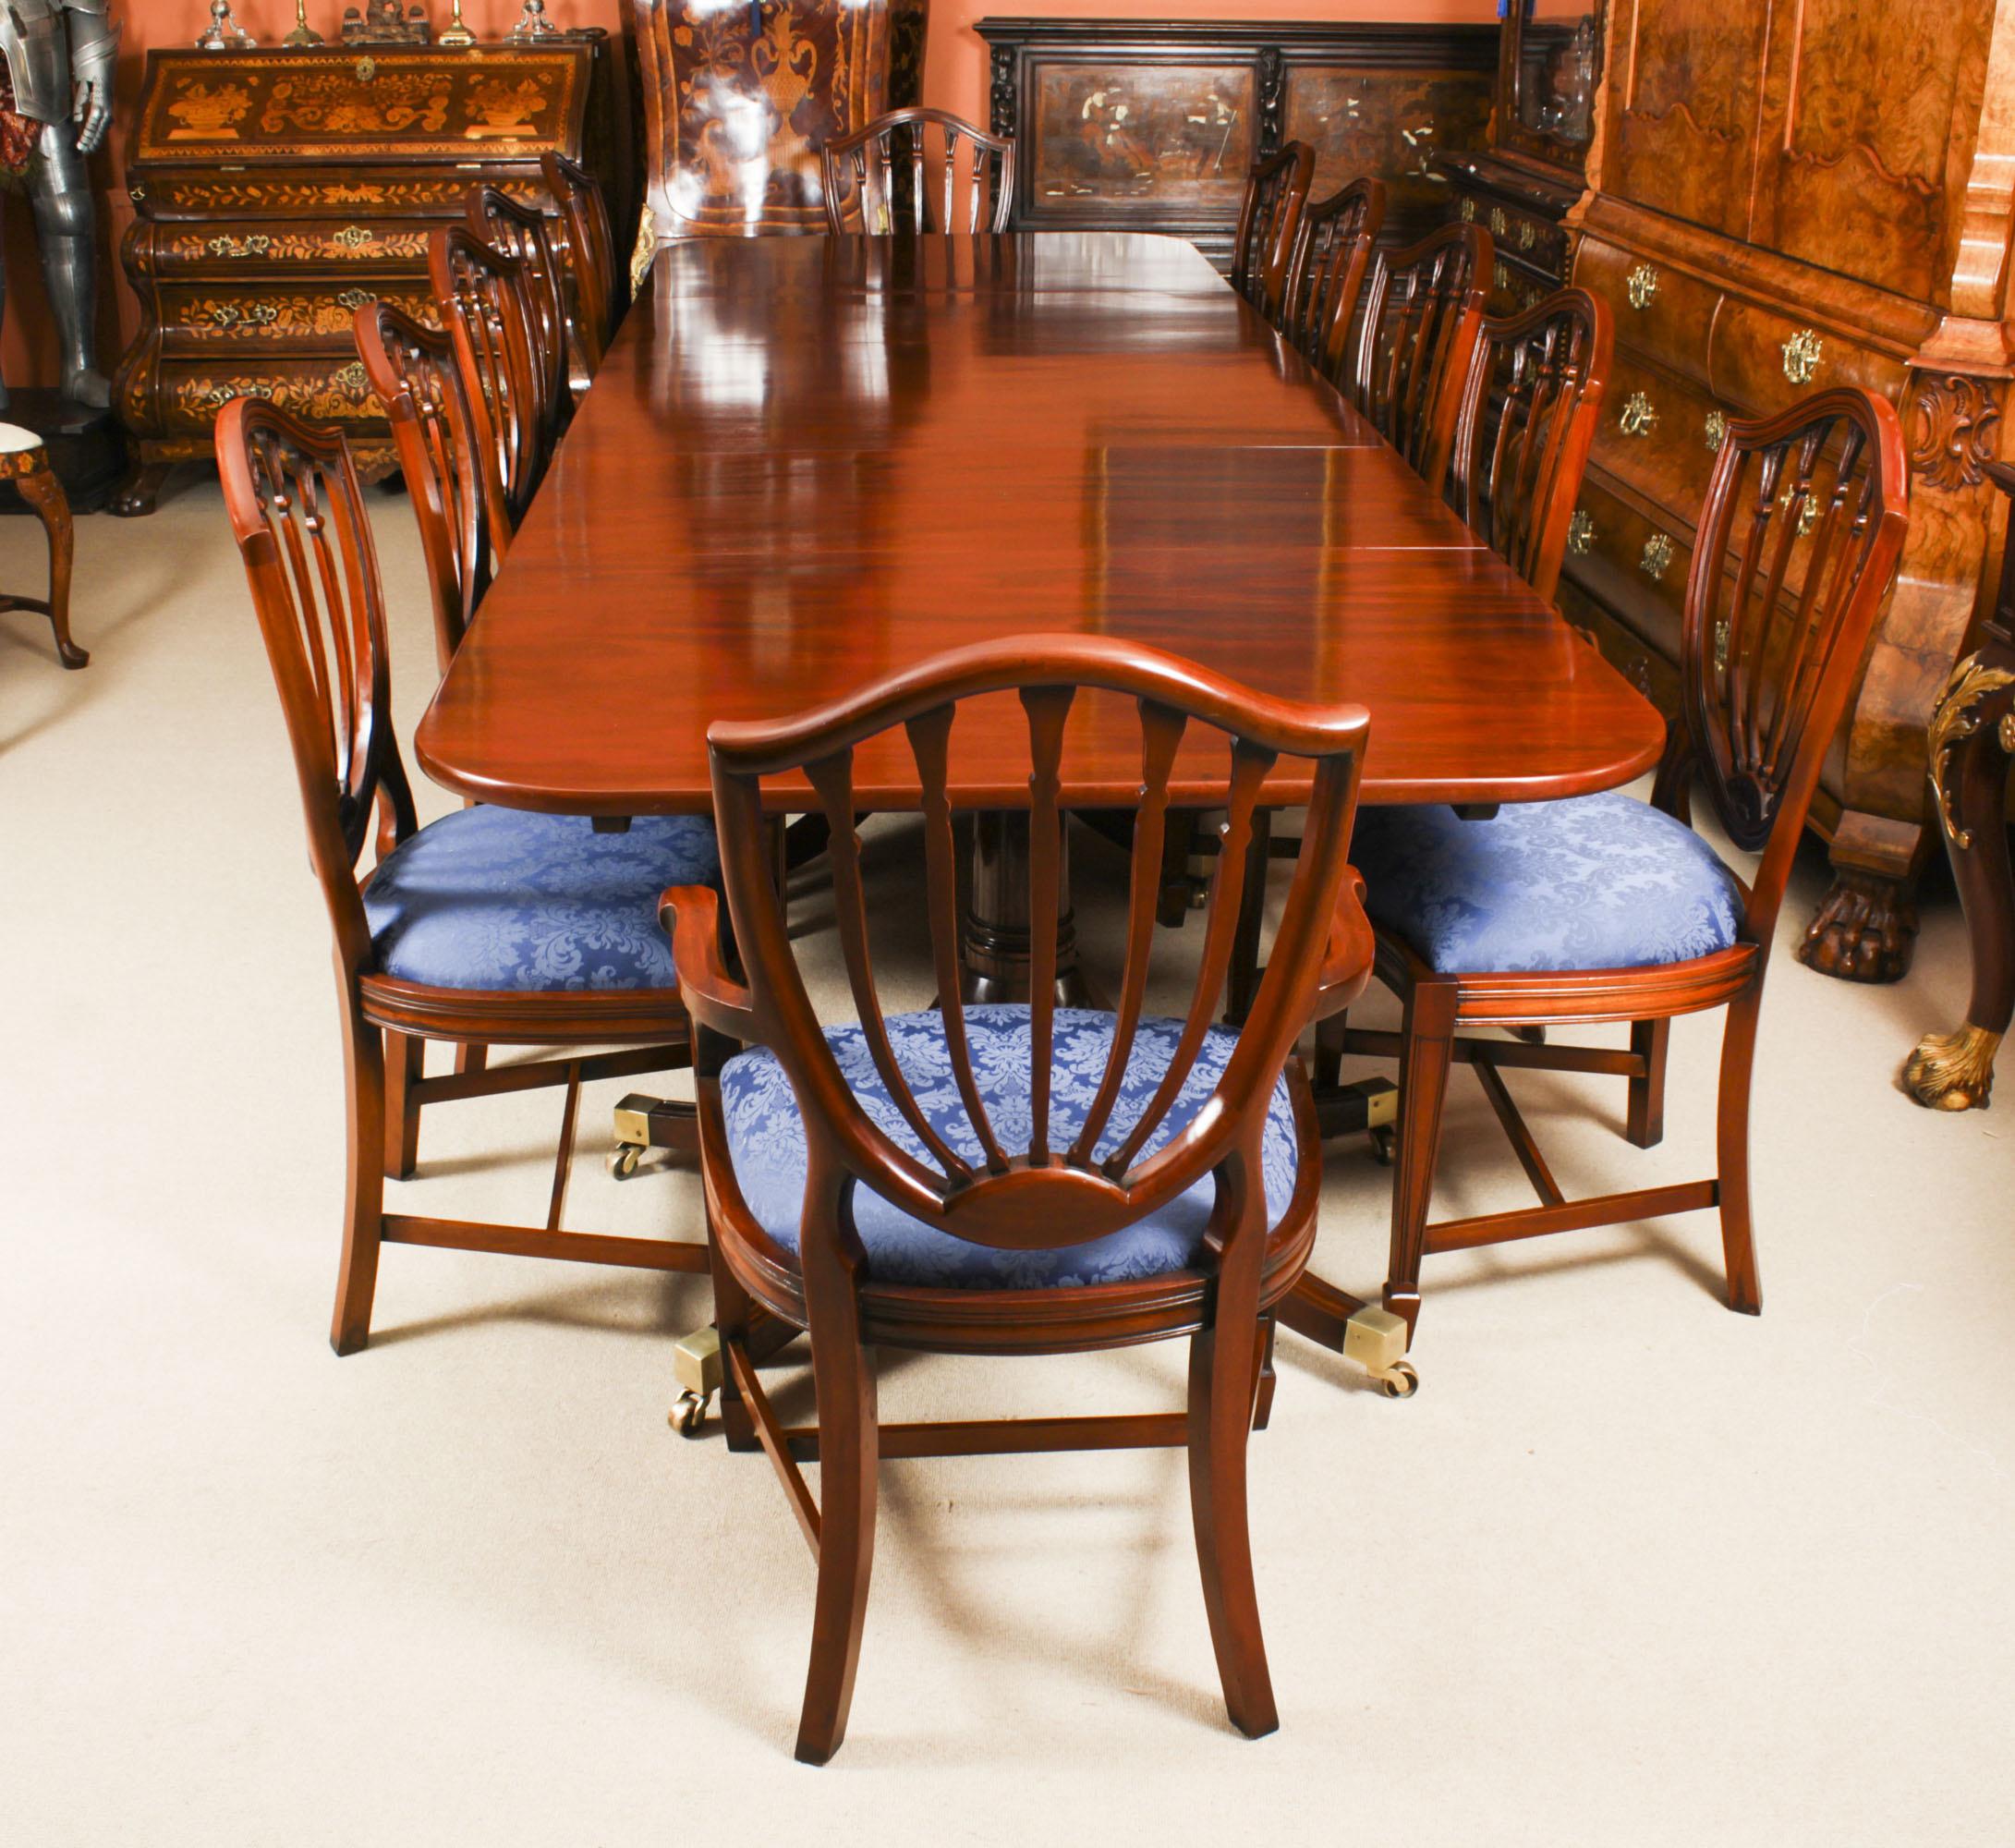 This is an elegant antique dining set that comprises an antique Regency Revival dining table dating from the 19th Century and a set of twelve Hepplewhite dining chairs.

The table has two leaves which can be added or removed as required to suit